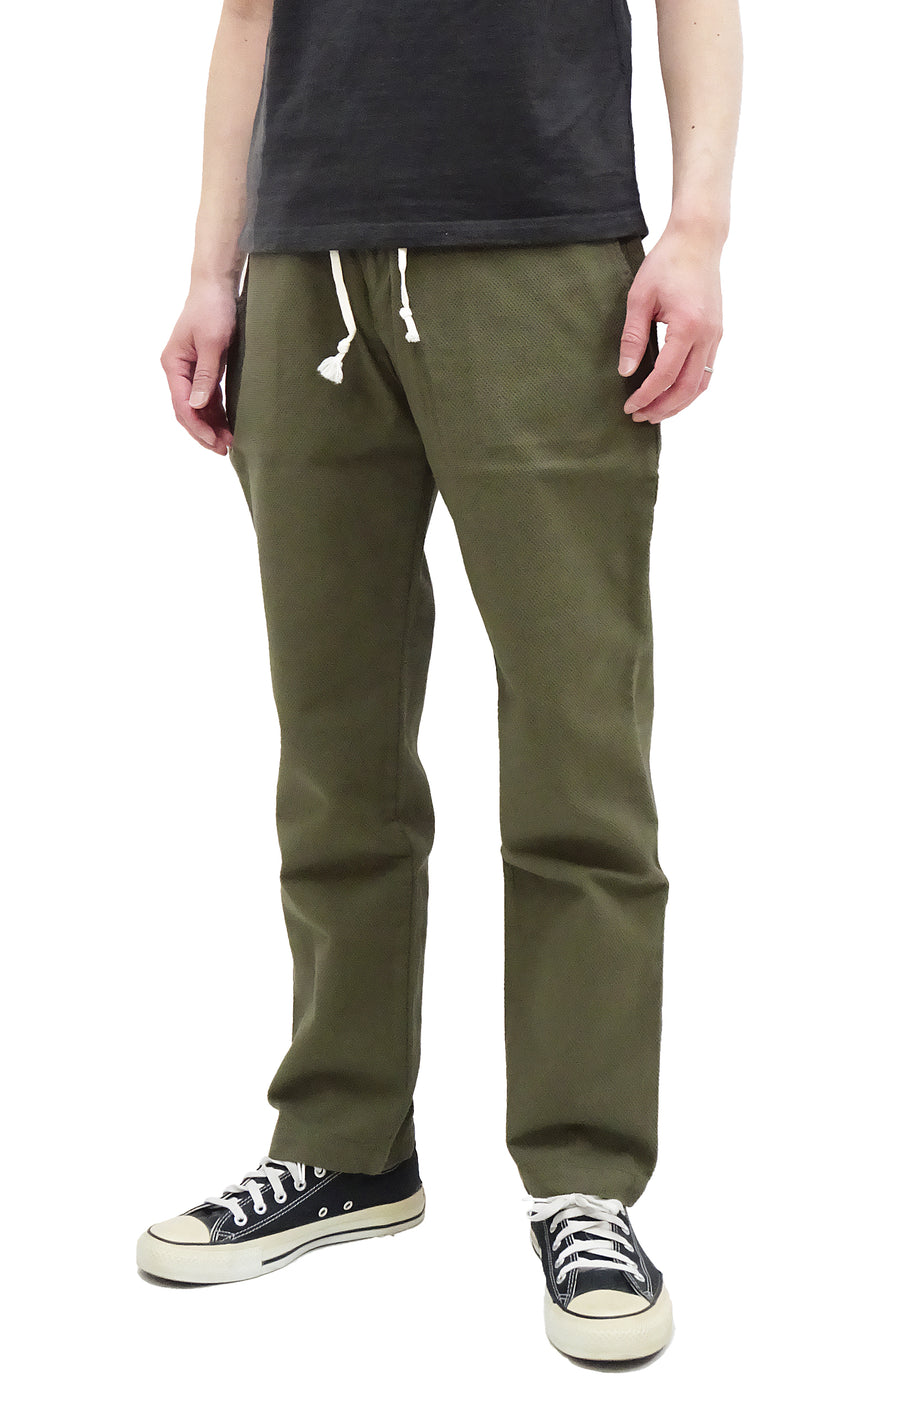 Momotaro Jeans Pants Men's Casual Dobby Fabric Relaxed-Tapered Easy Pants with Elastic Drawstring Waistt MPT1010M31 Olive